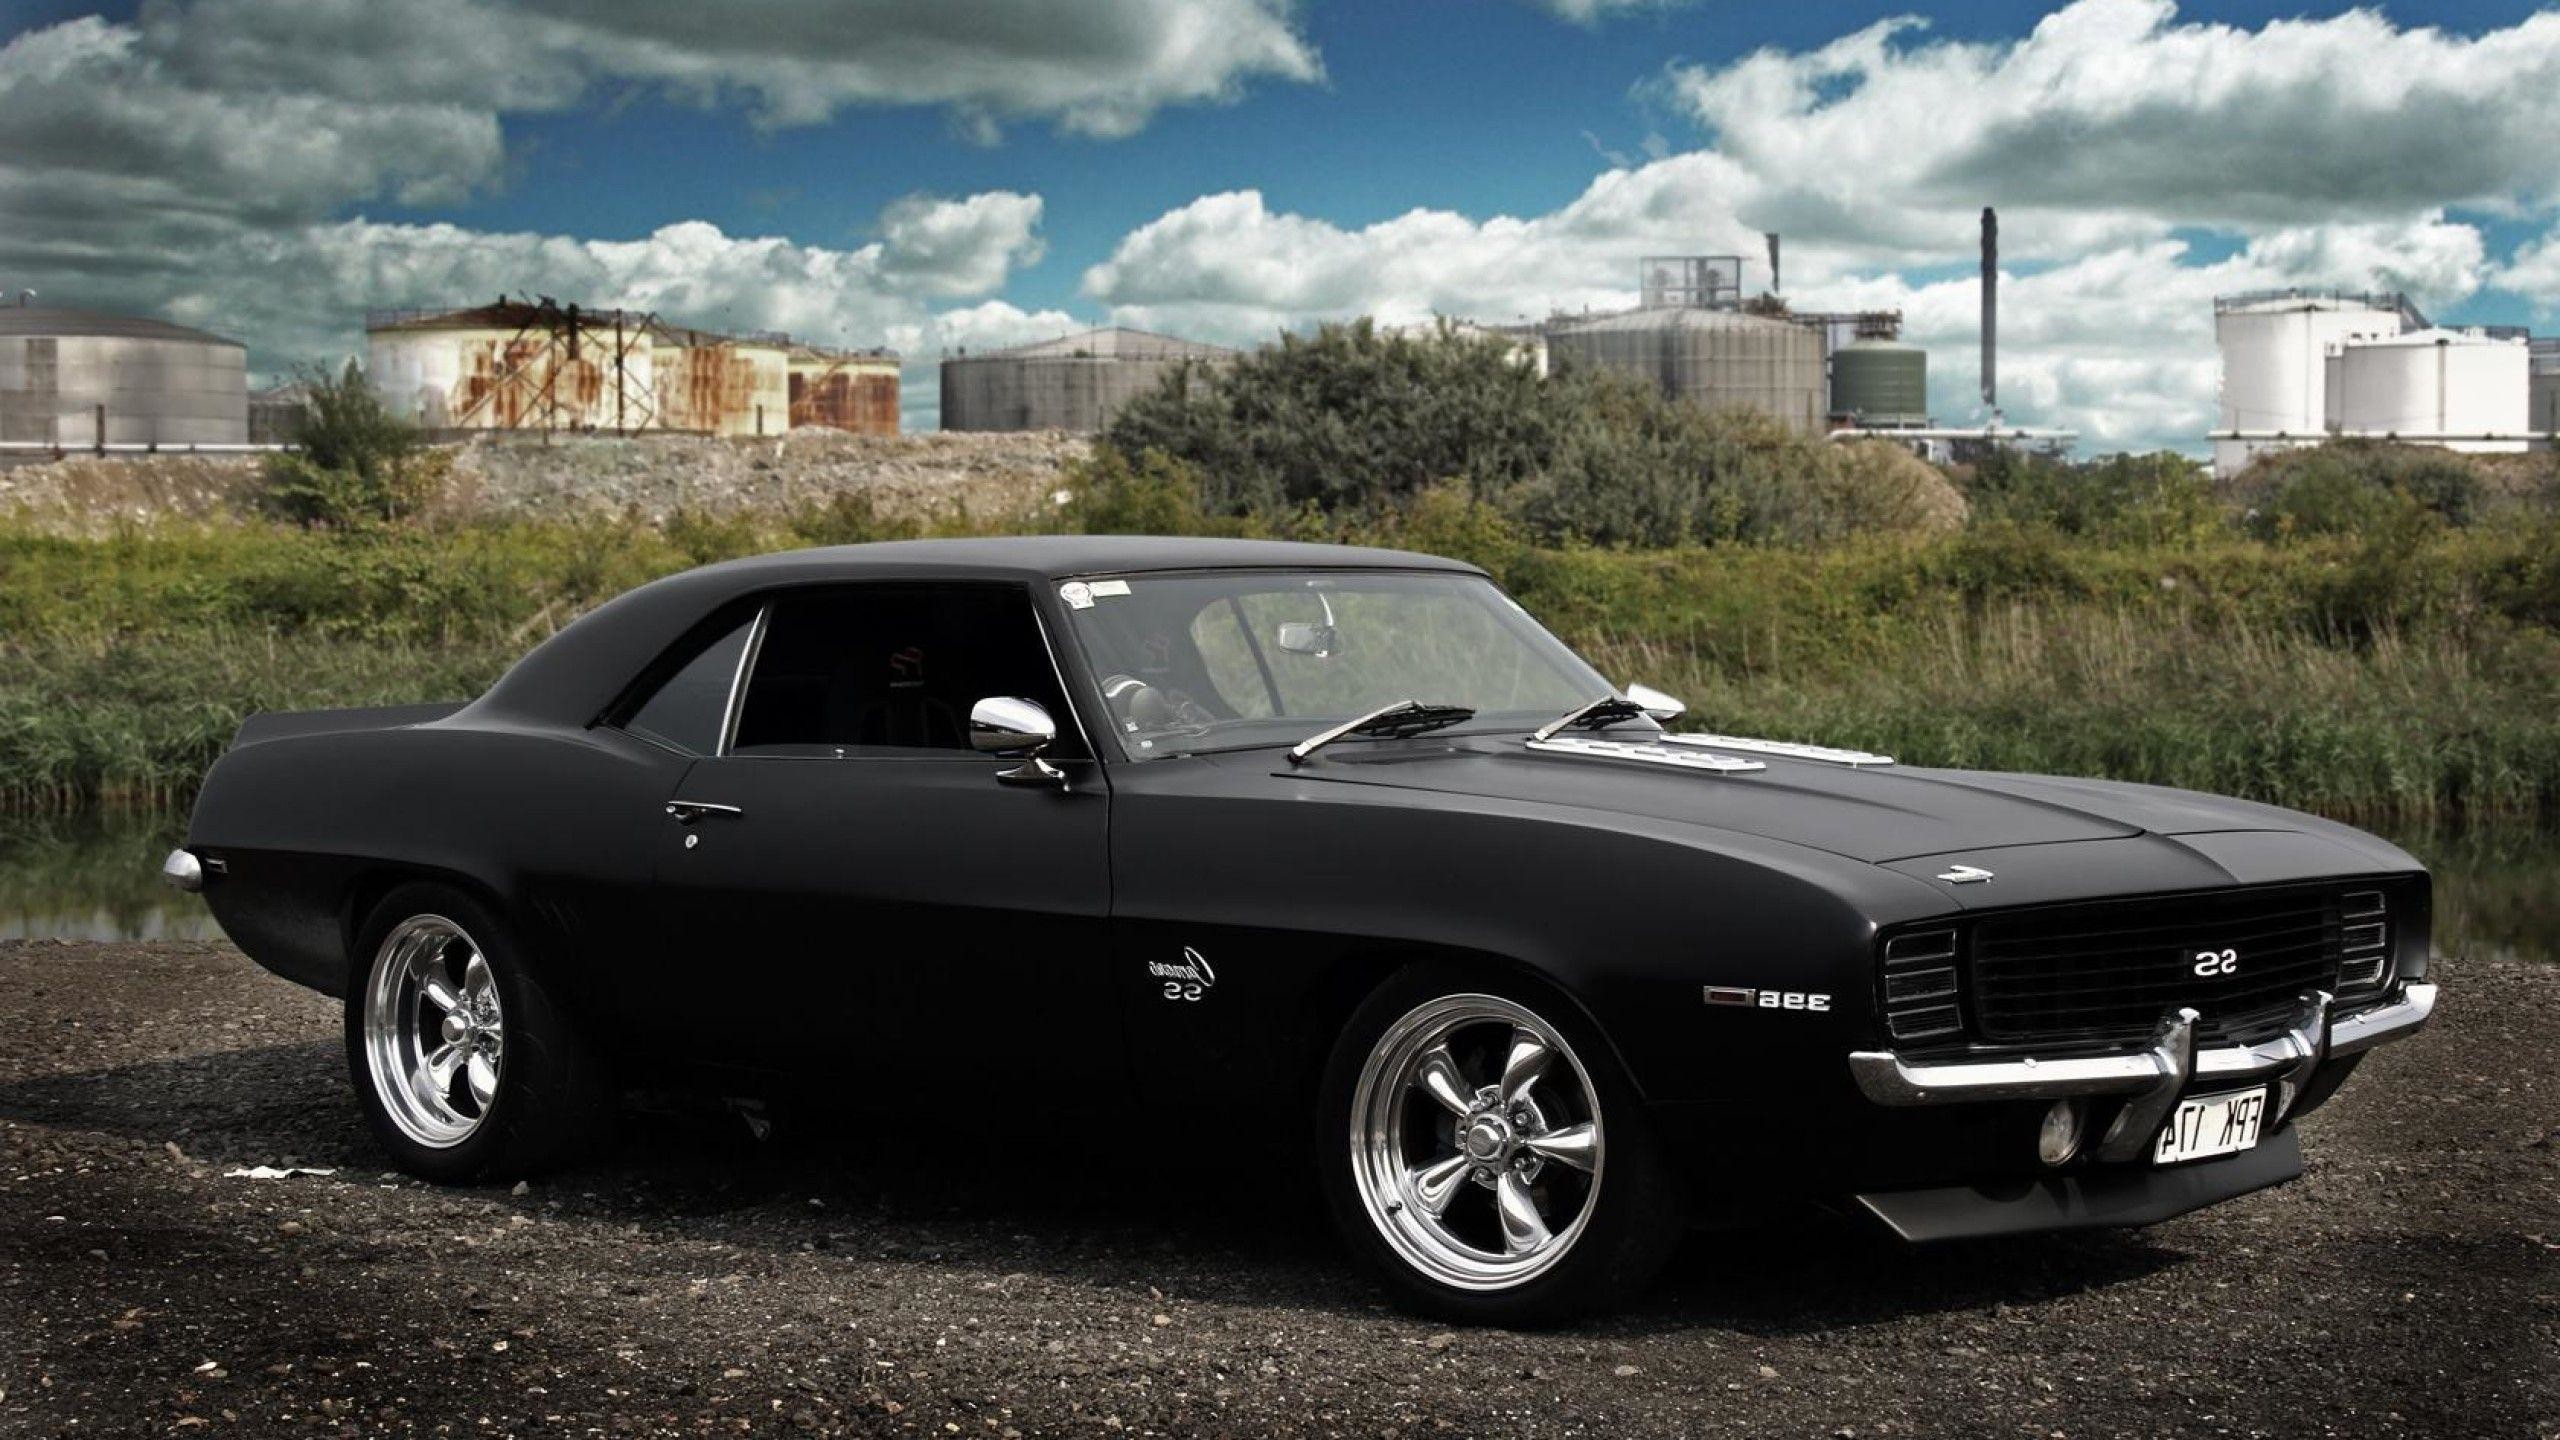 2560x1440 Muscle Cars Wallpapers Wallpaper Cave